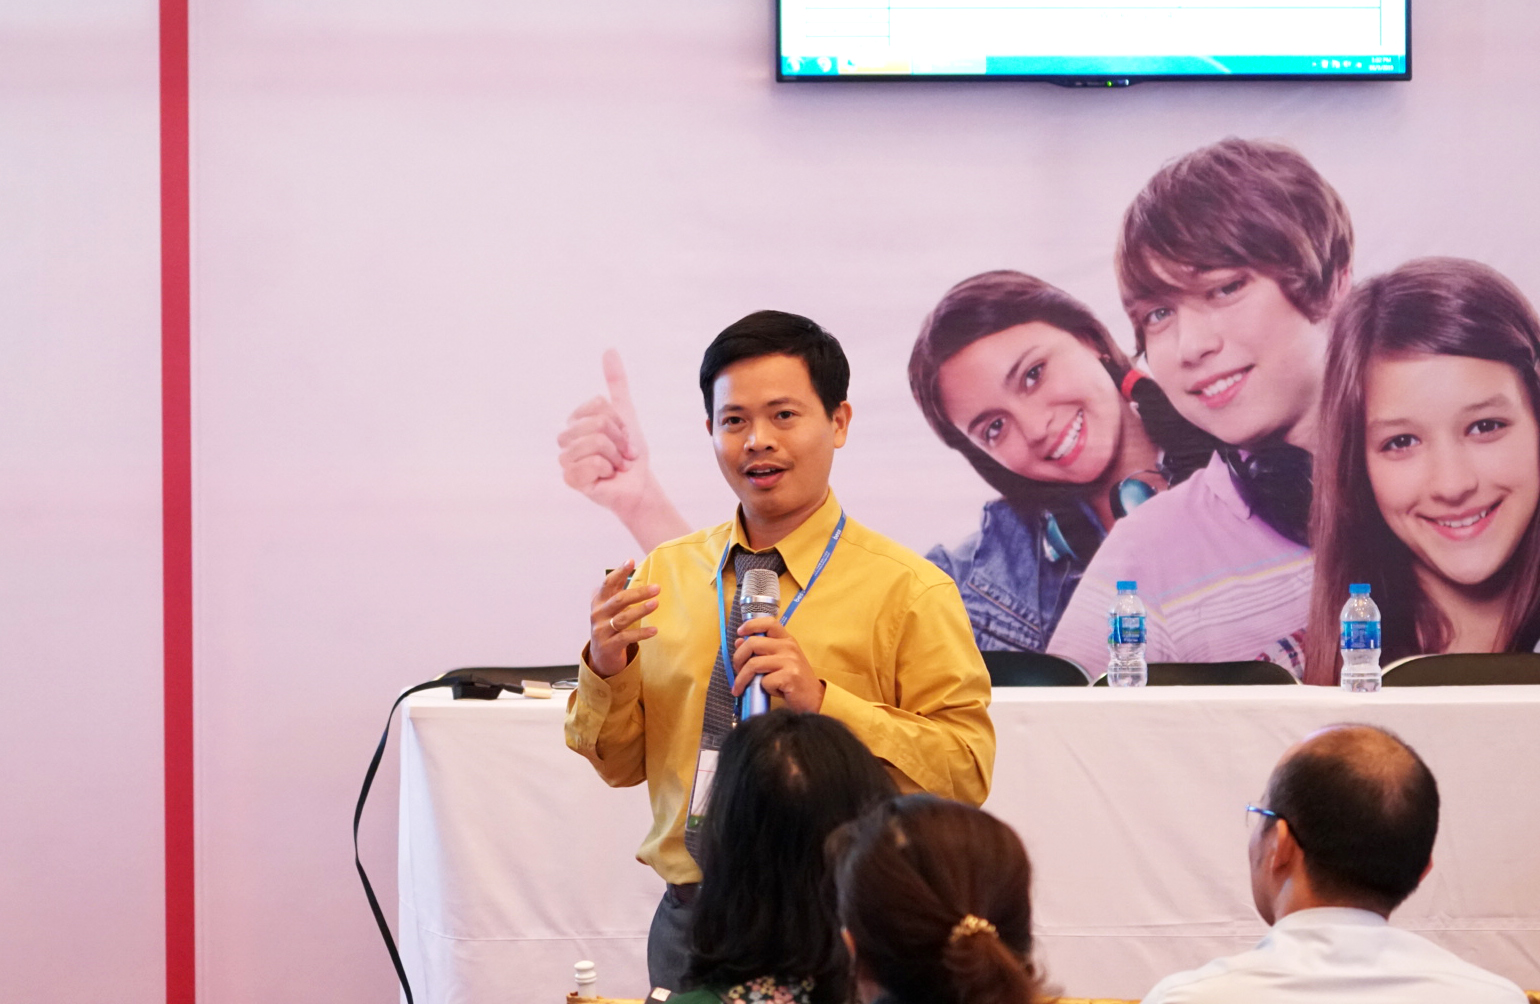 “From the trends that took place until early 2019, I proposed some solutions for investing in technology and teaching foreign languages in Vietnam. Promoting information technology in teaching is extremely important in HSU” – shared by Mr. Vu 